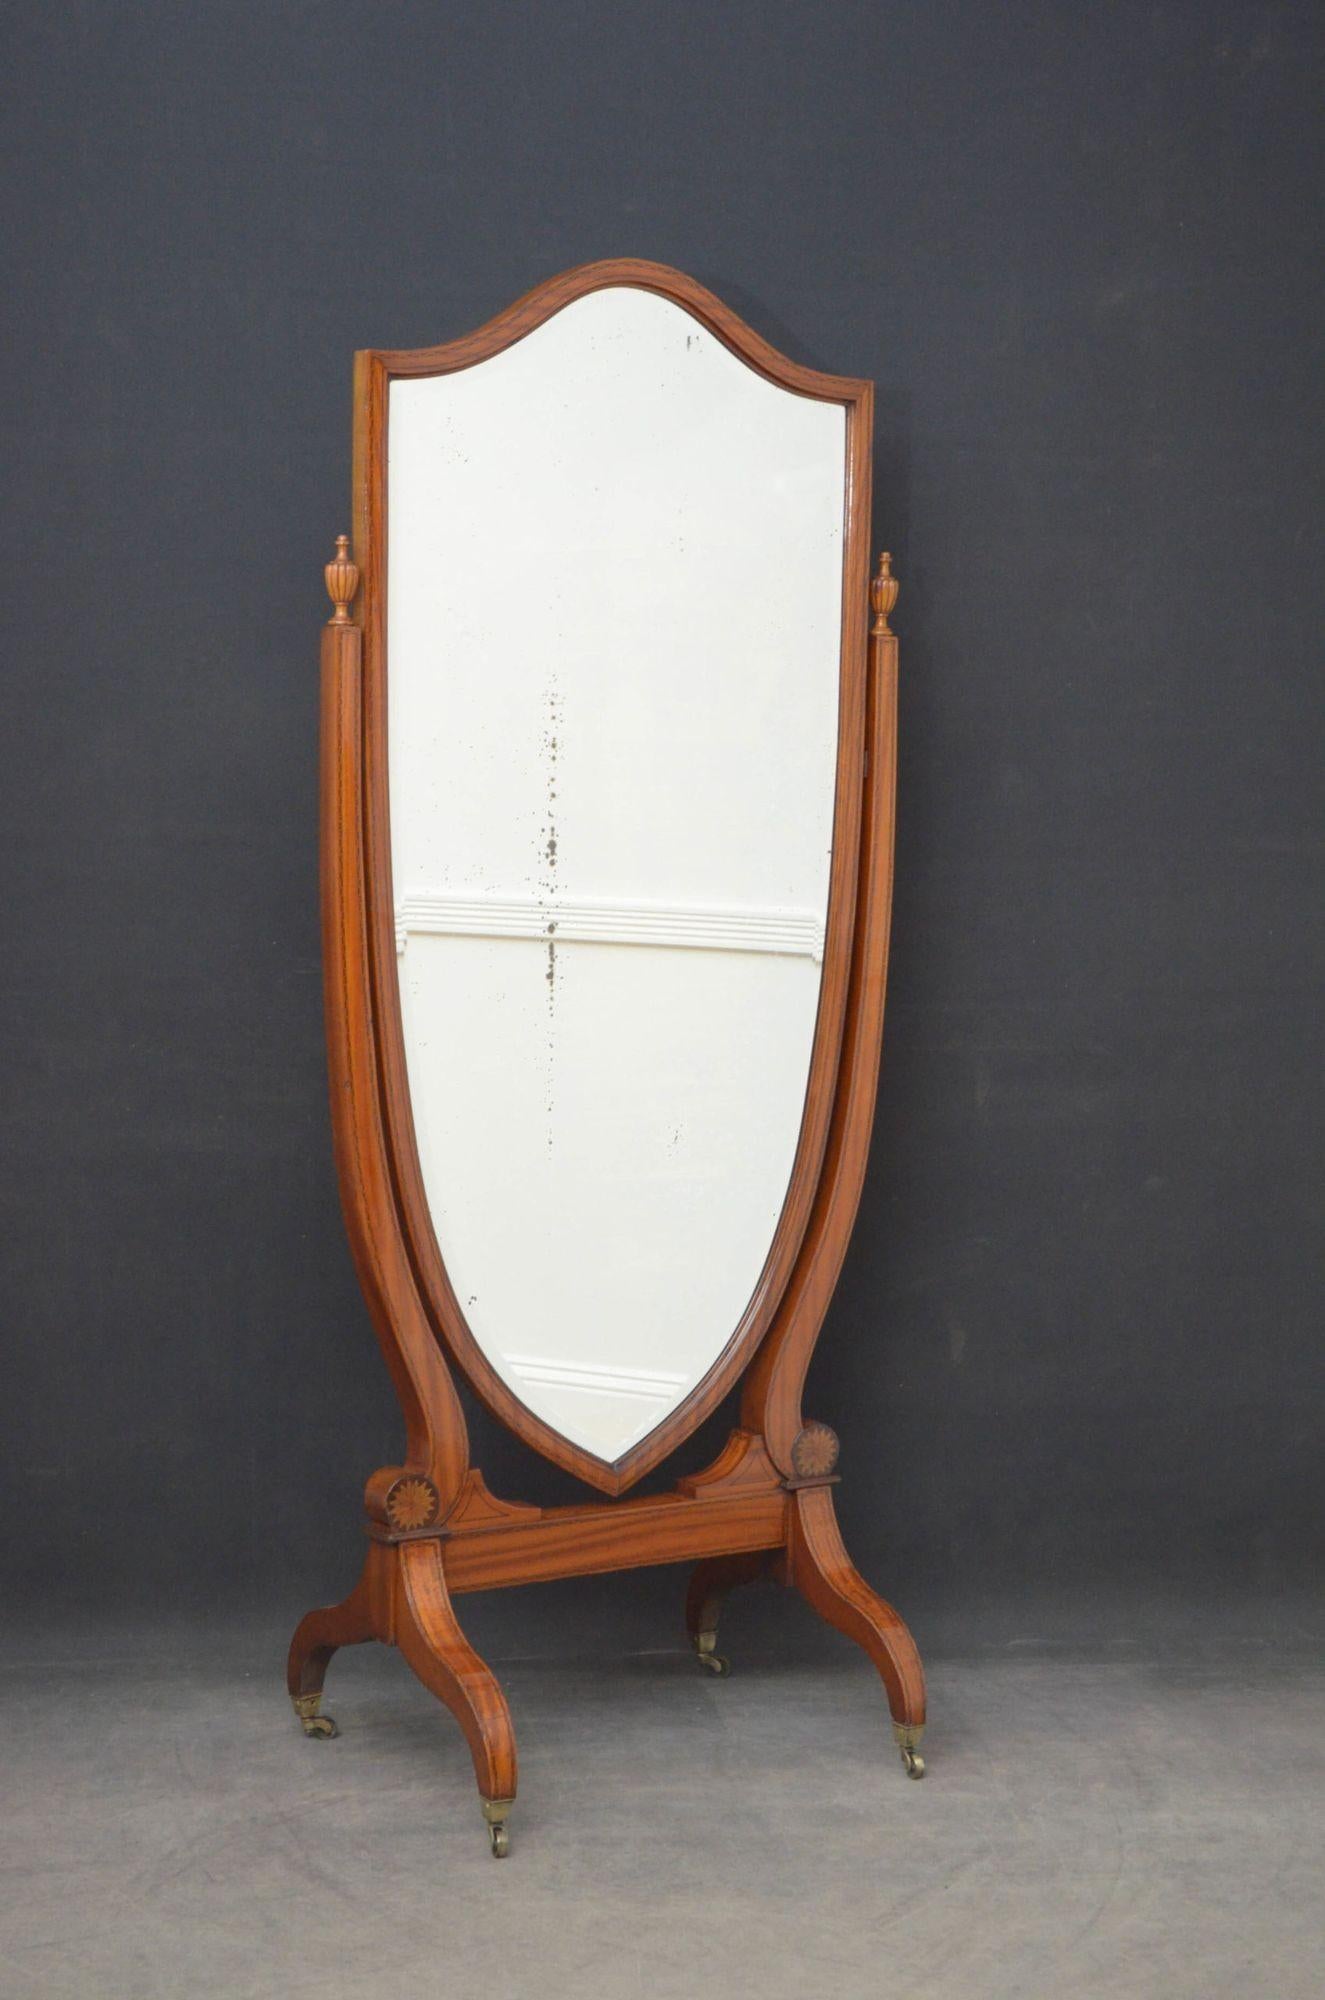 Sn4752 An elegant Edwardian satinwood and inlaid, shield shaped cheval mirror, having original bevelled edge mirror with some silvering in inlaid frame and finely inlaid supports with original fluted finials to top and sun inlays to base, standing